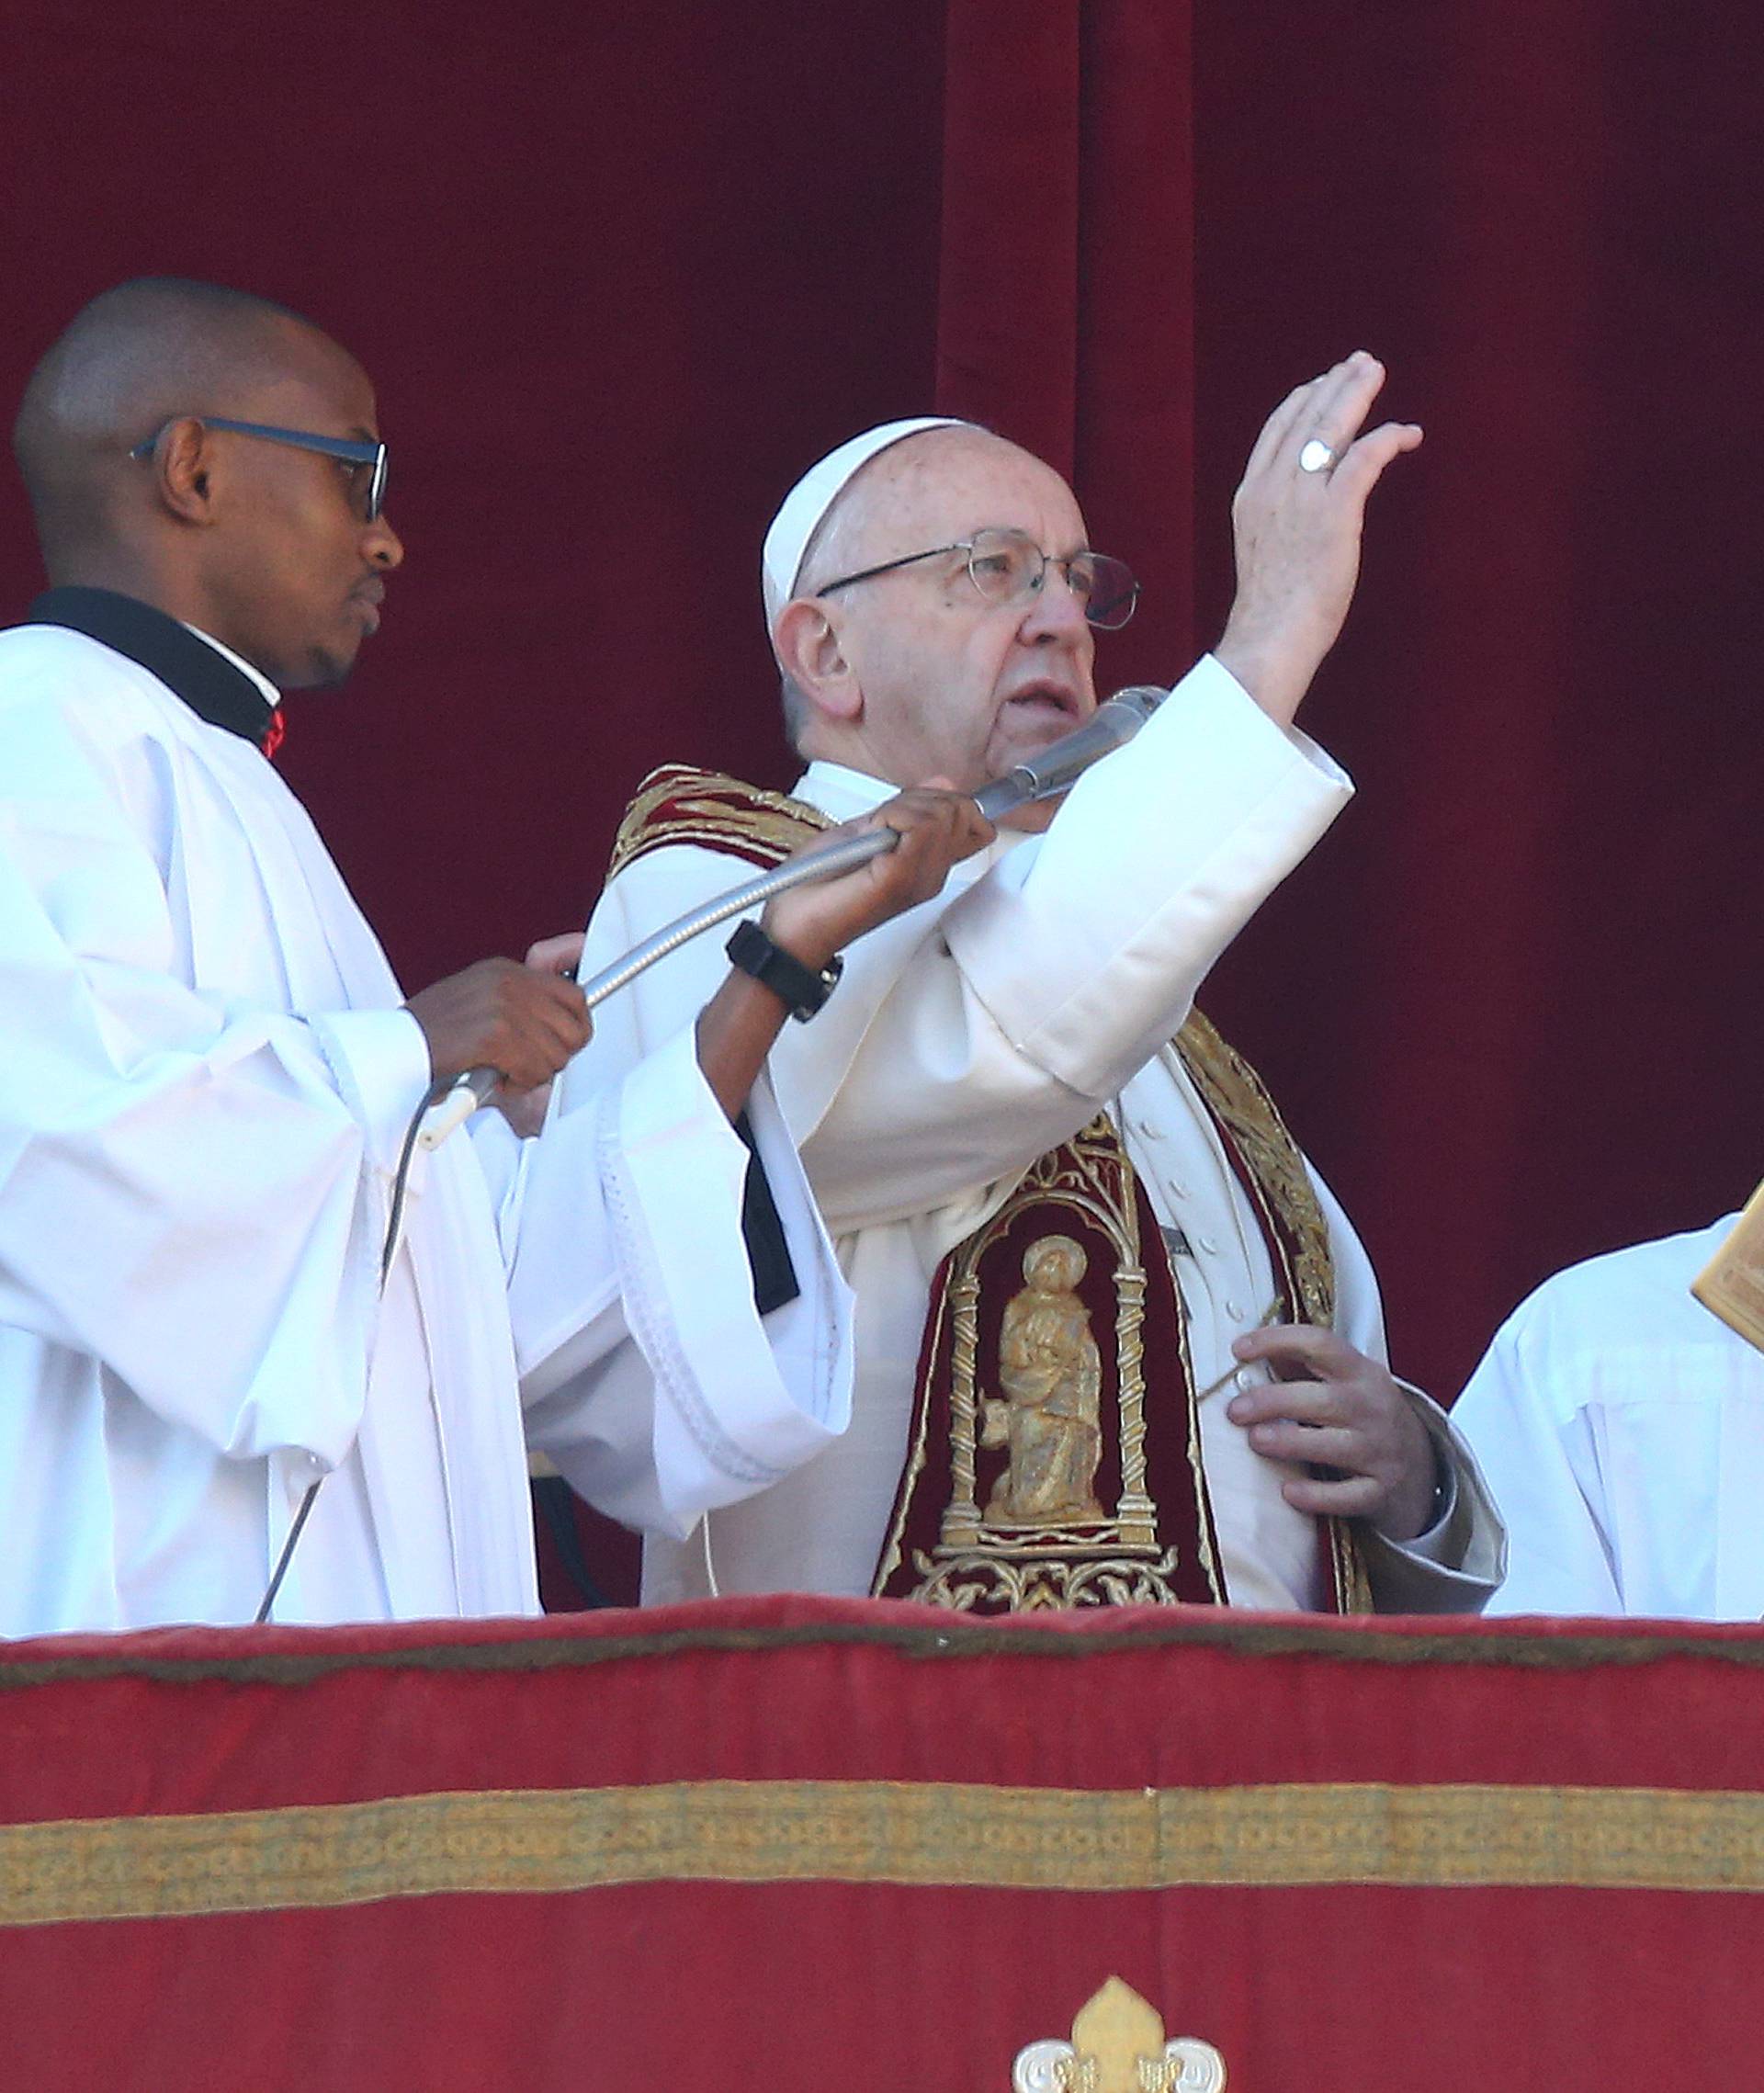 Pope Francis makes a blessing during the "Urbi et Orbi" (to the city and the world) message from the balcony overlooking St. Peter's Square at the Vatican